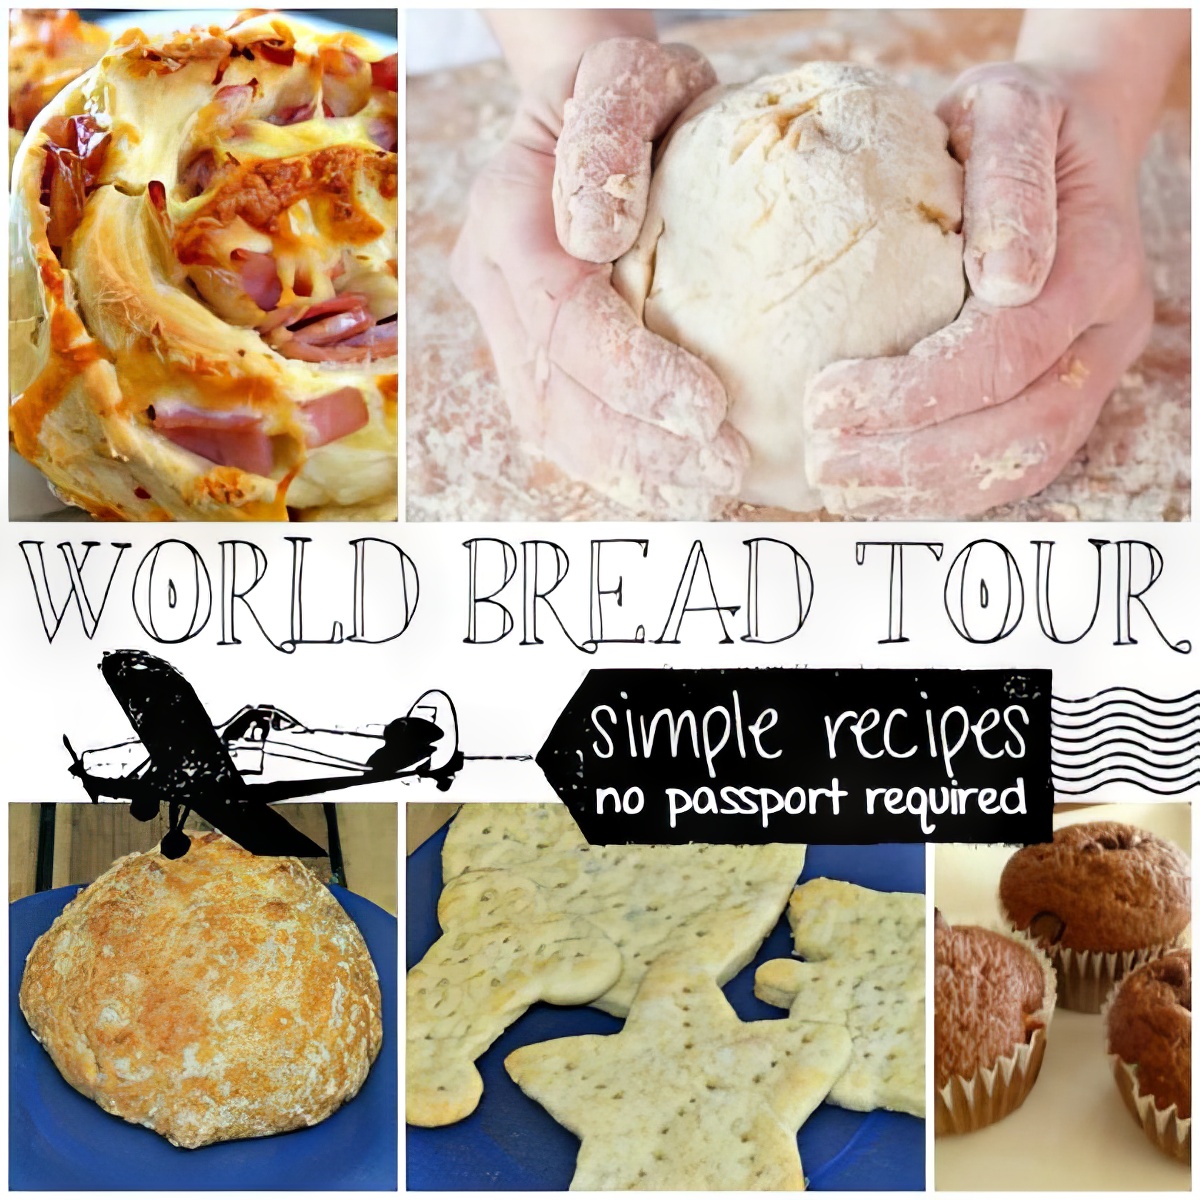 Go on a World Bread Tour as you try to make these lovely amazing bread recipes, kids will surely love!